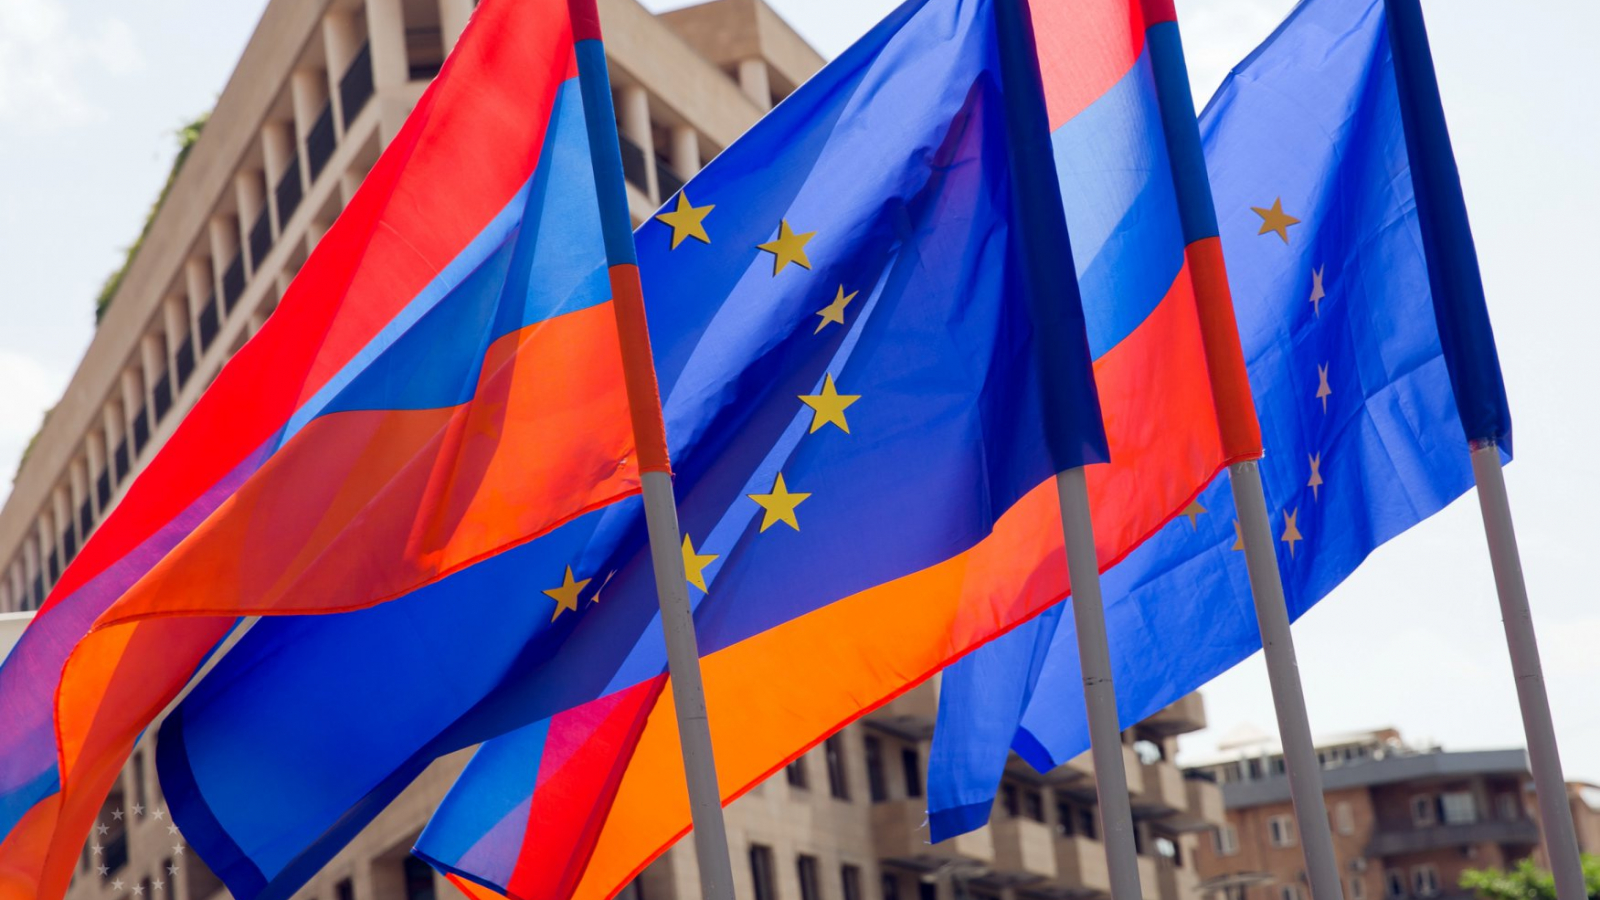 Statement by the Spokesperson on the early parliamentary elections in Armenia